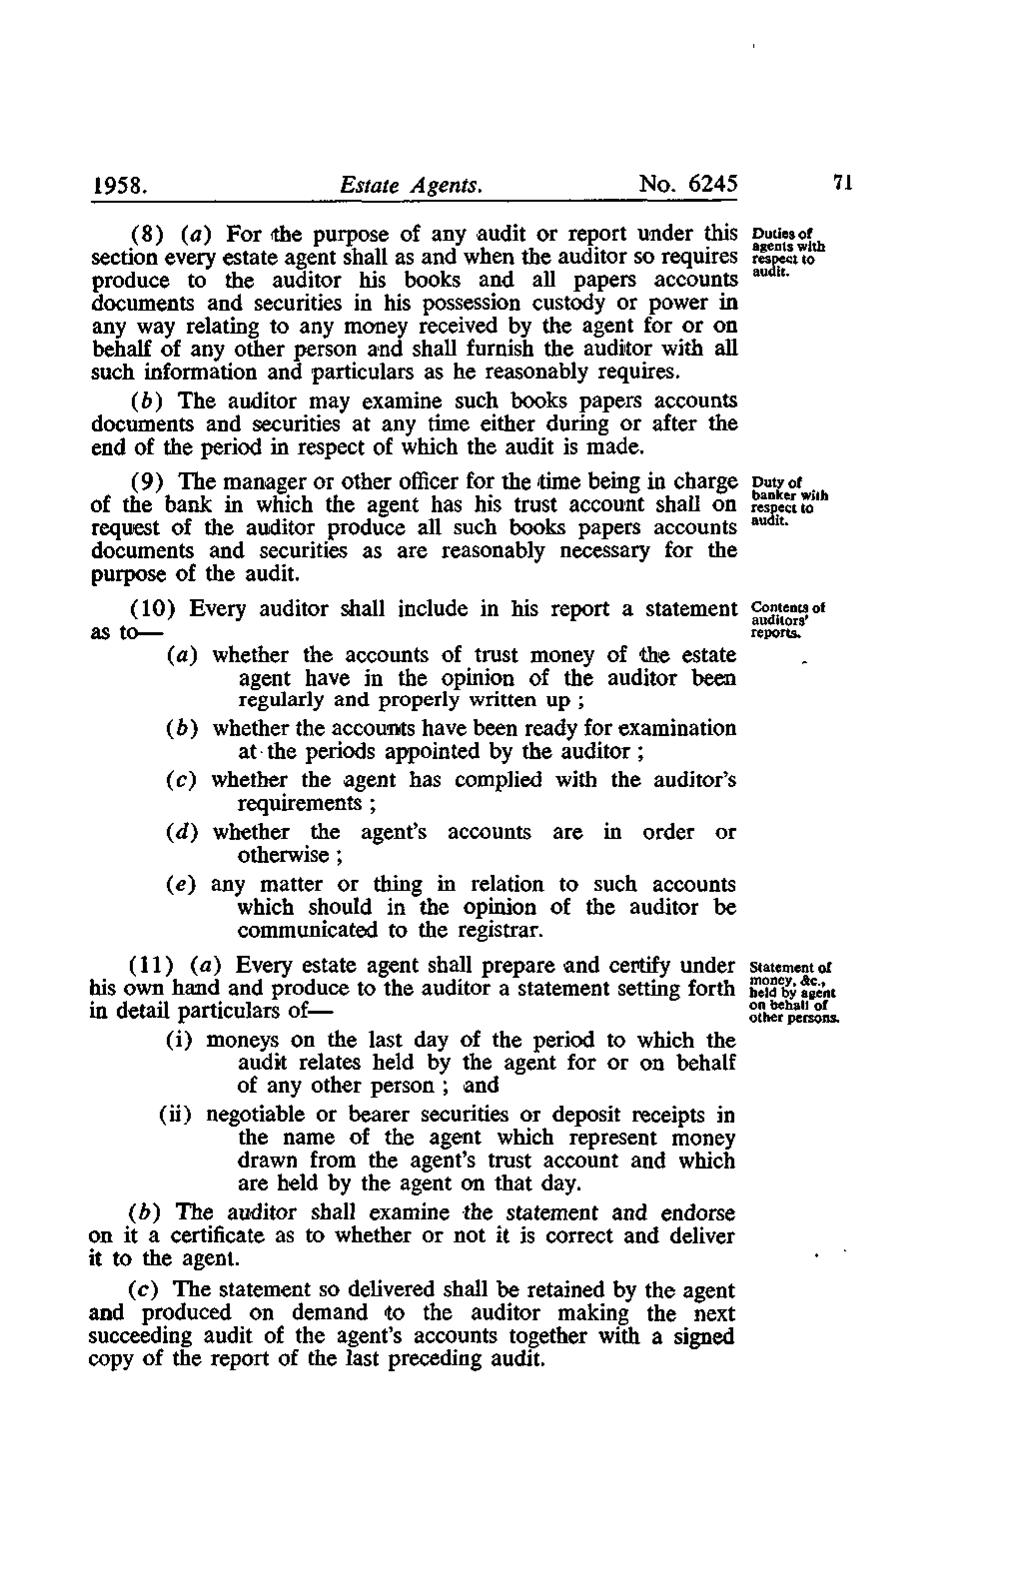 1958. Estate Agents. No. 6245 71 (8) (a) For the purpose of any audit or report under this Duties of agents with section every estate agent shall as and when the auditor so requires respect to audit.